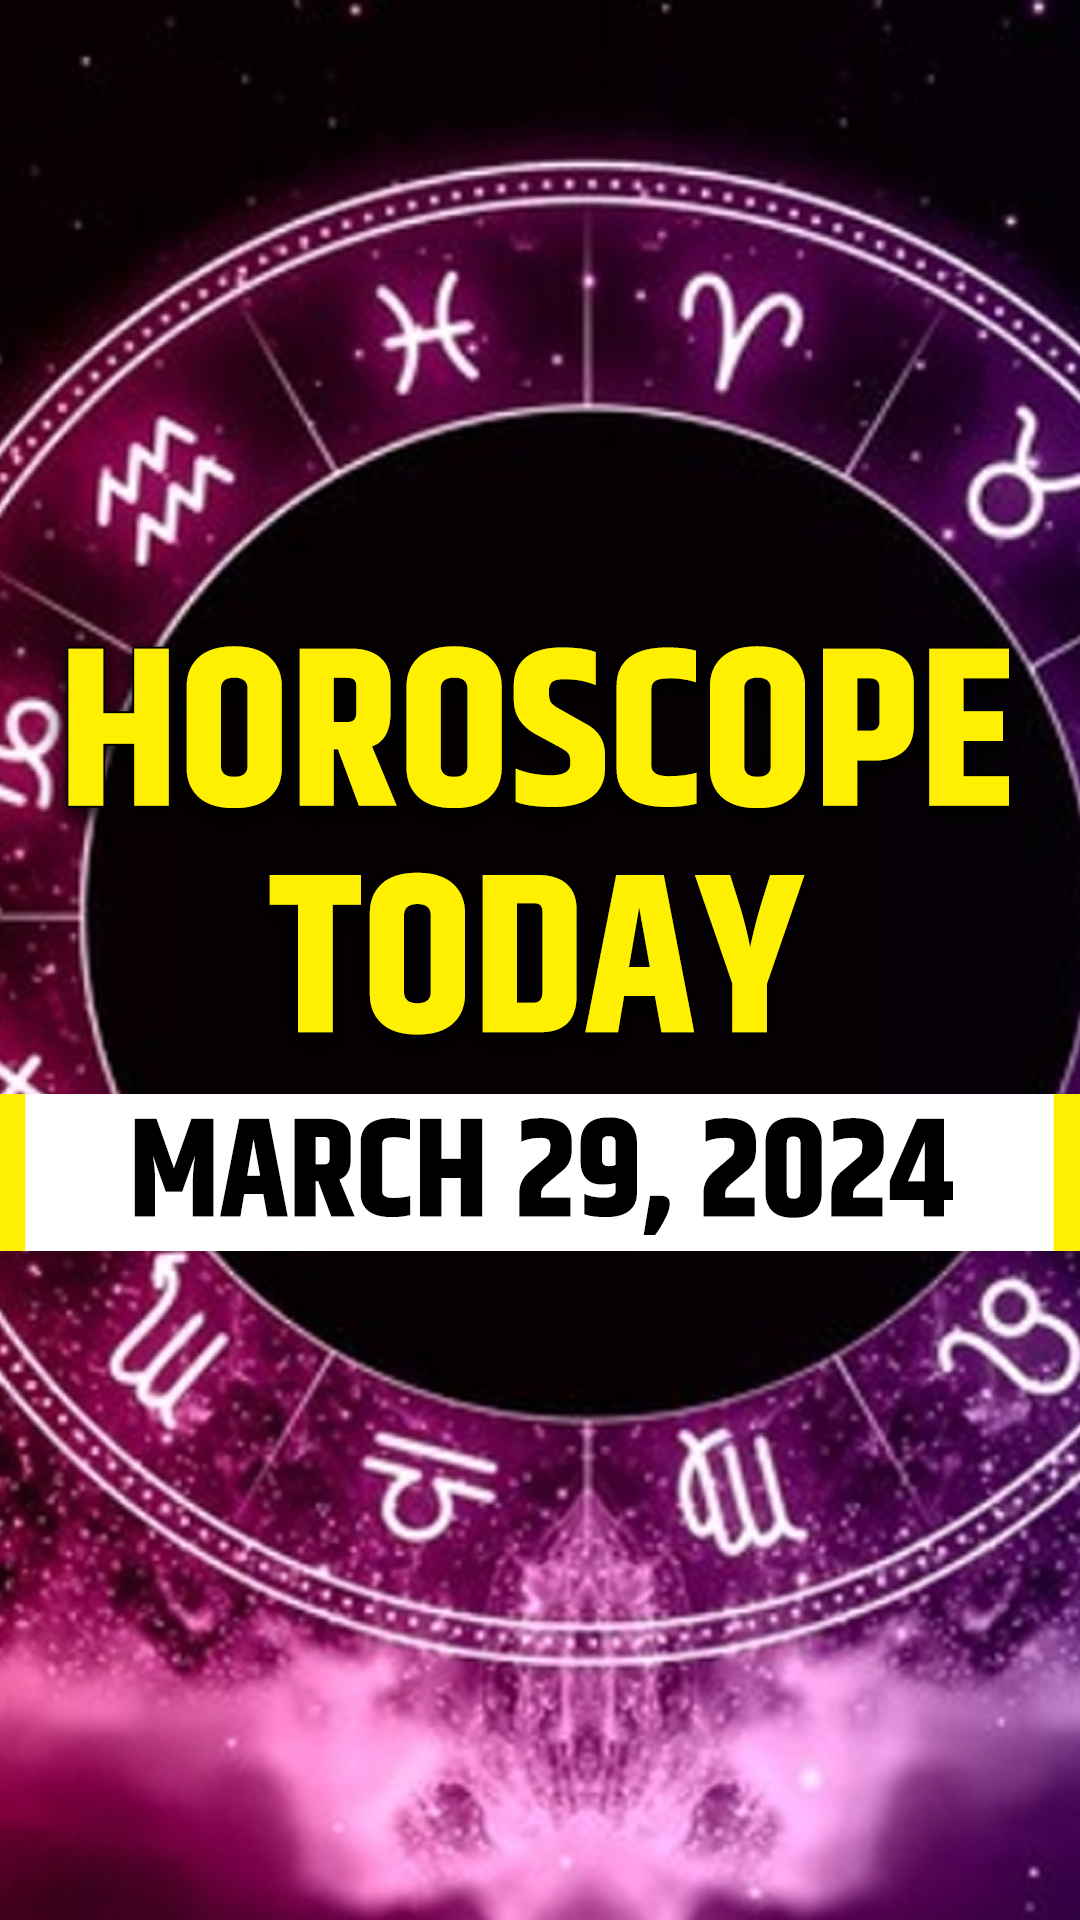 Pleasant day for Scorpio, know about other zodiac signs in March 29, 2024 horoscope